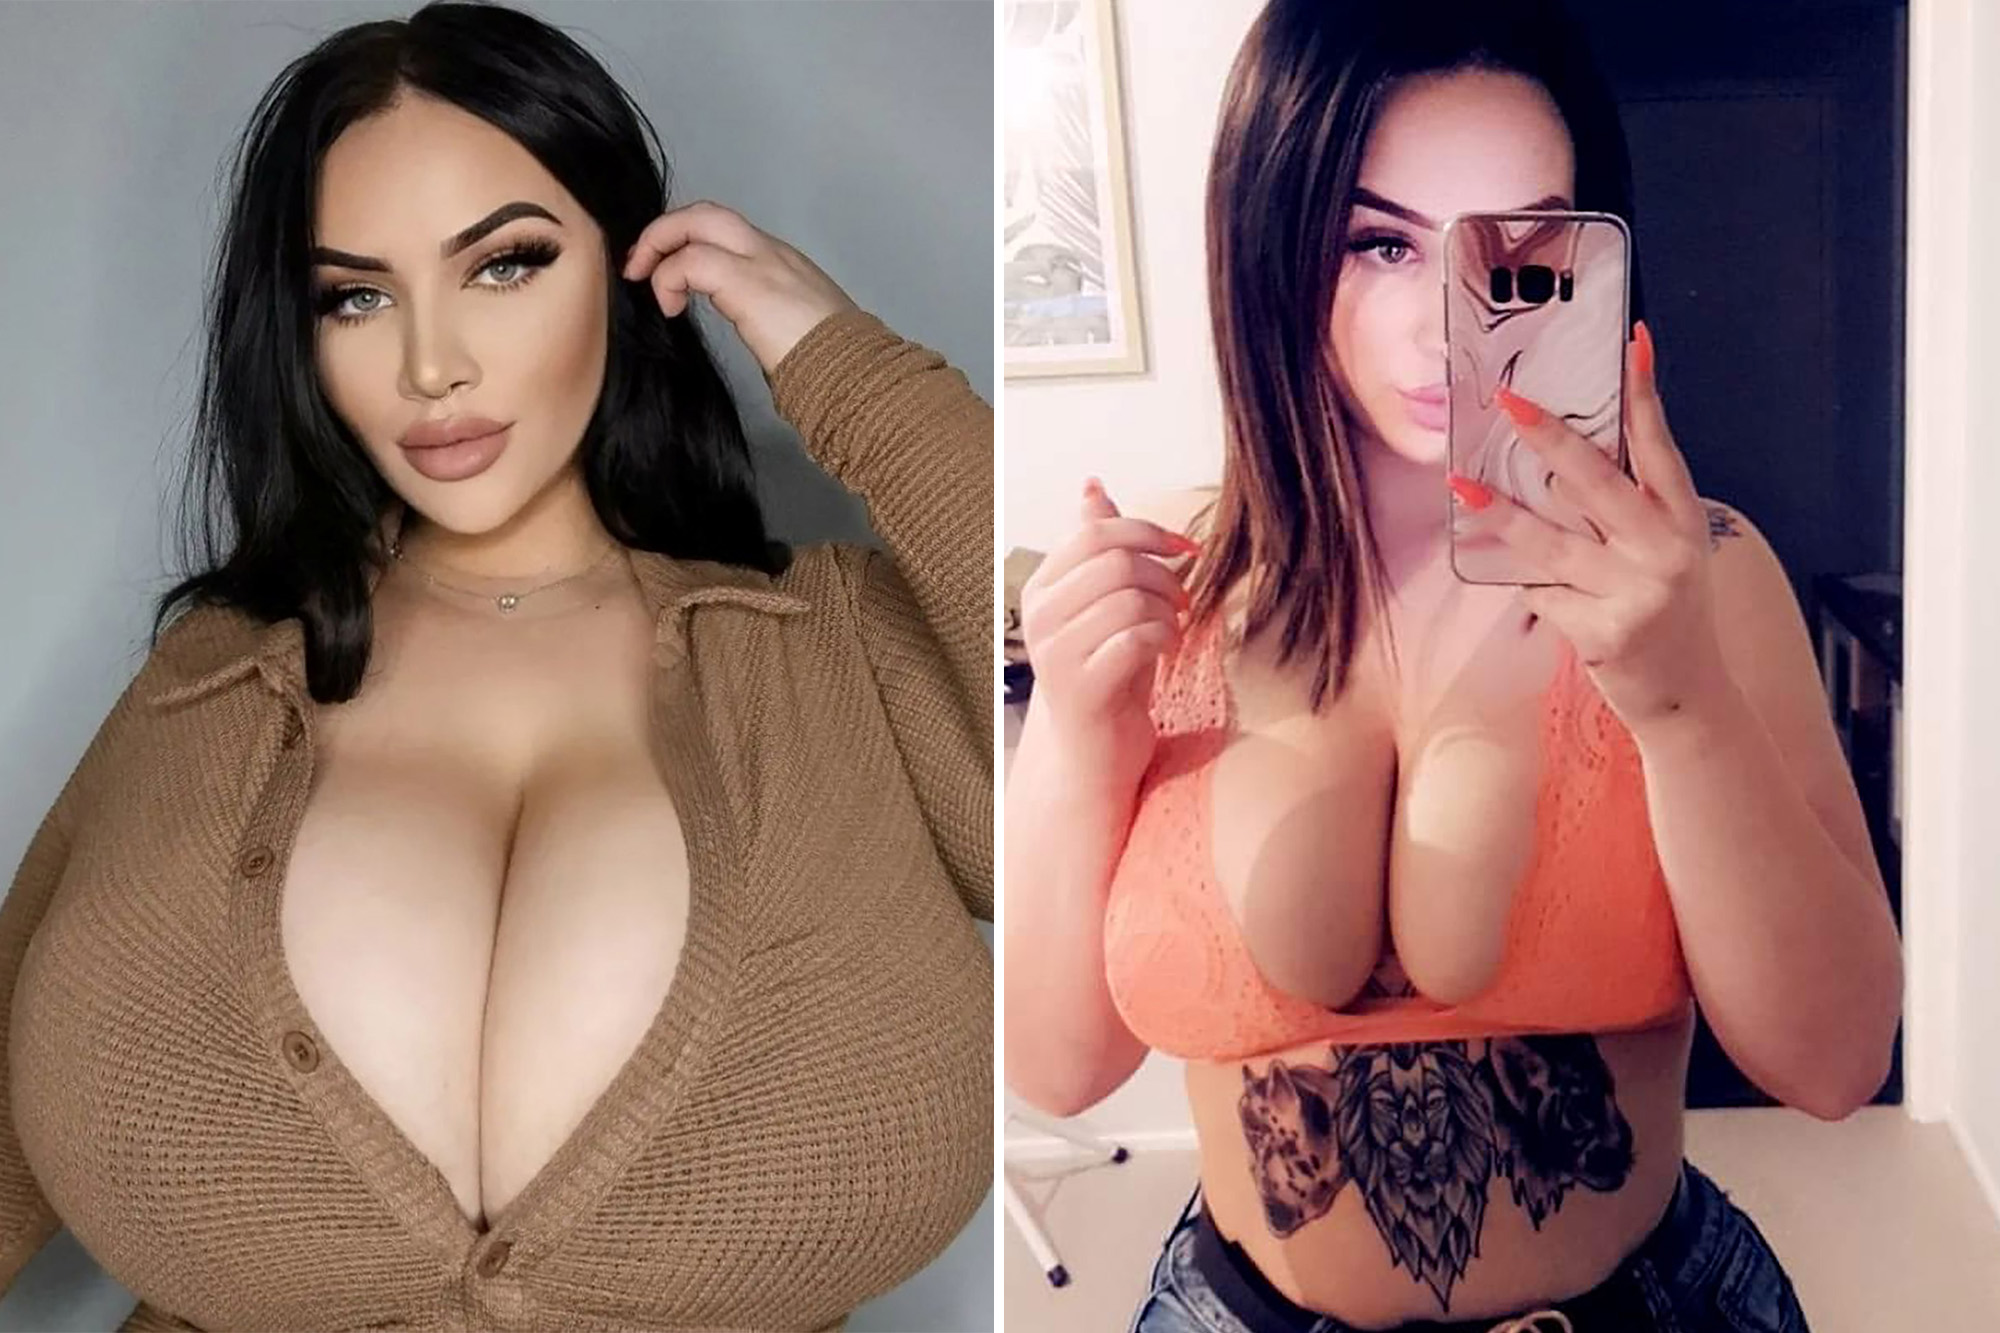 alina zahid recommends big breasted mexican women pic